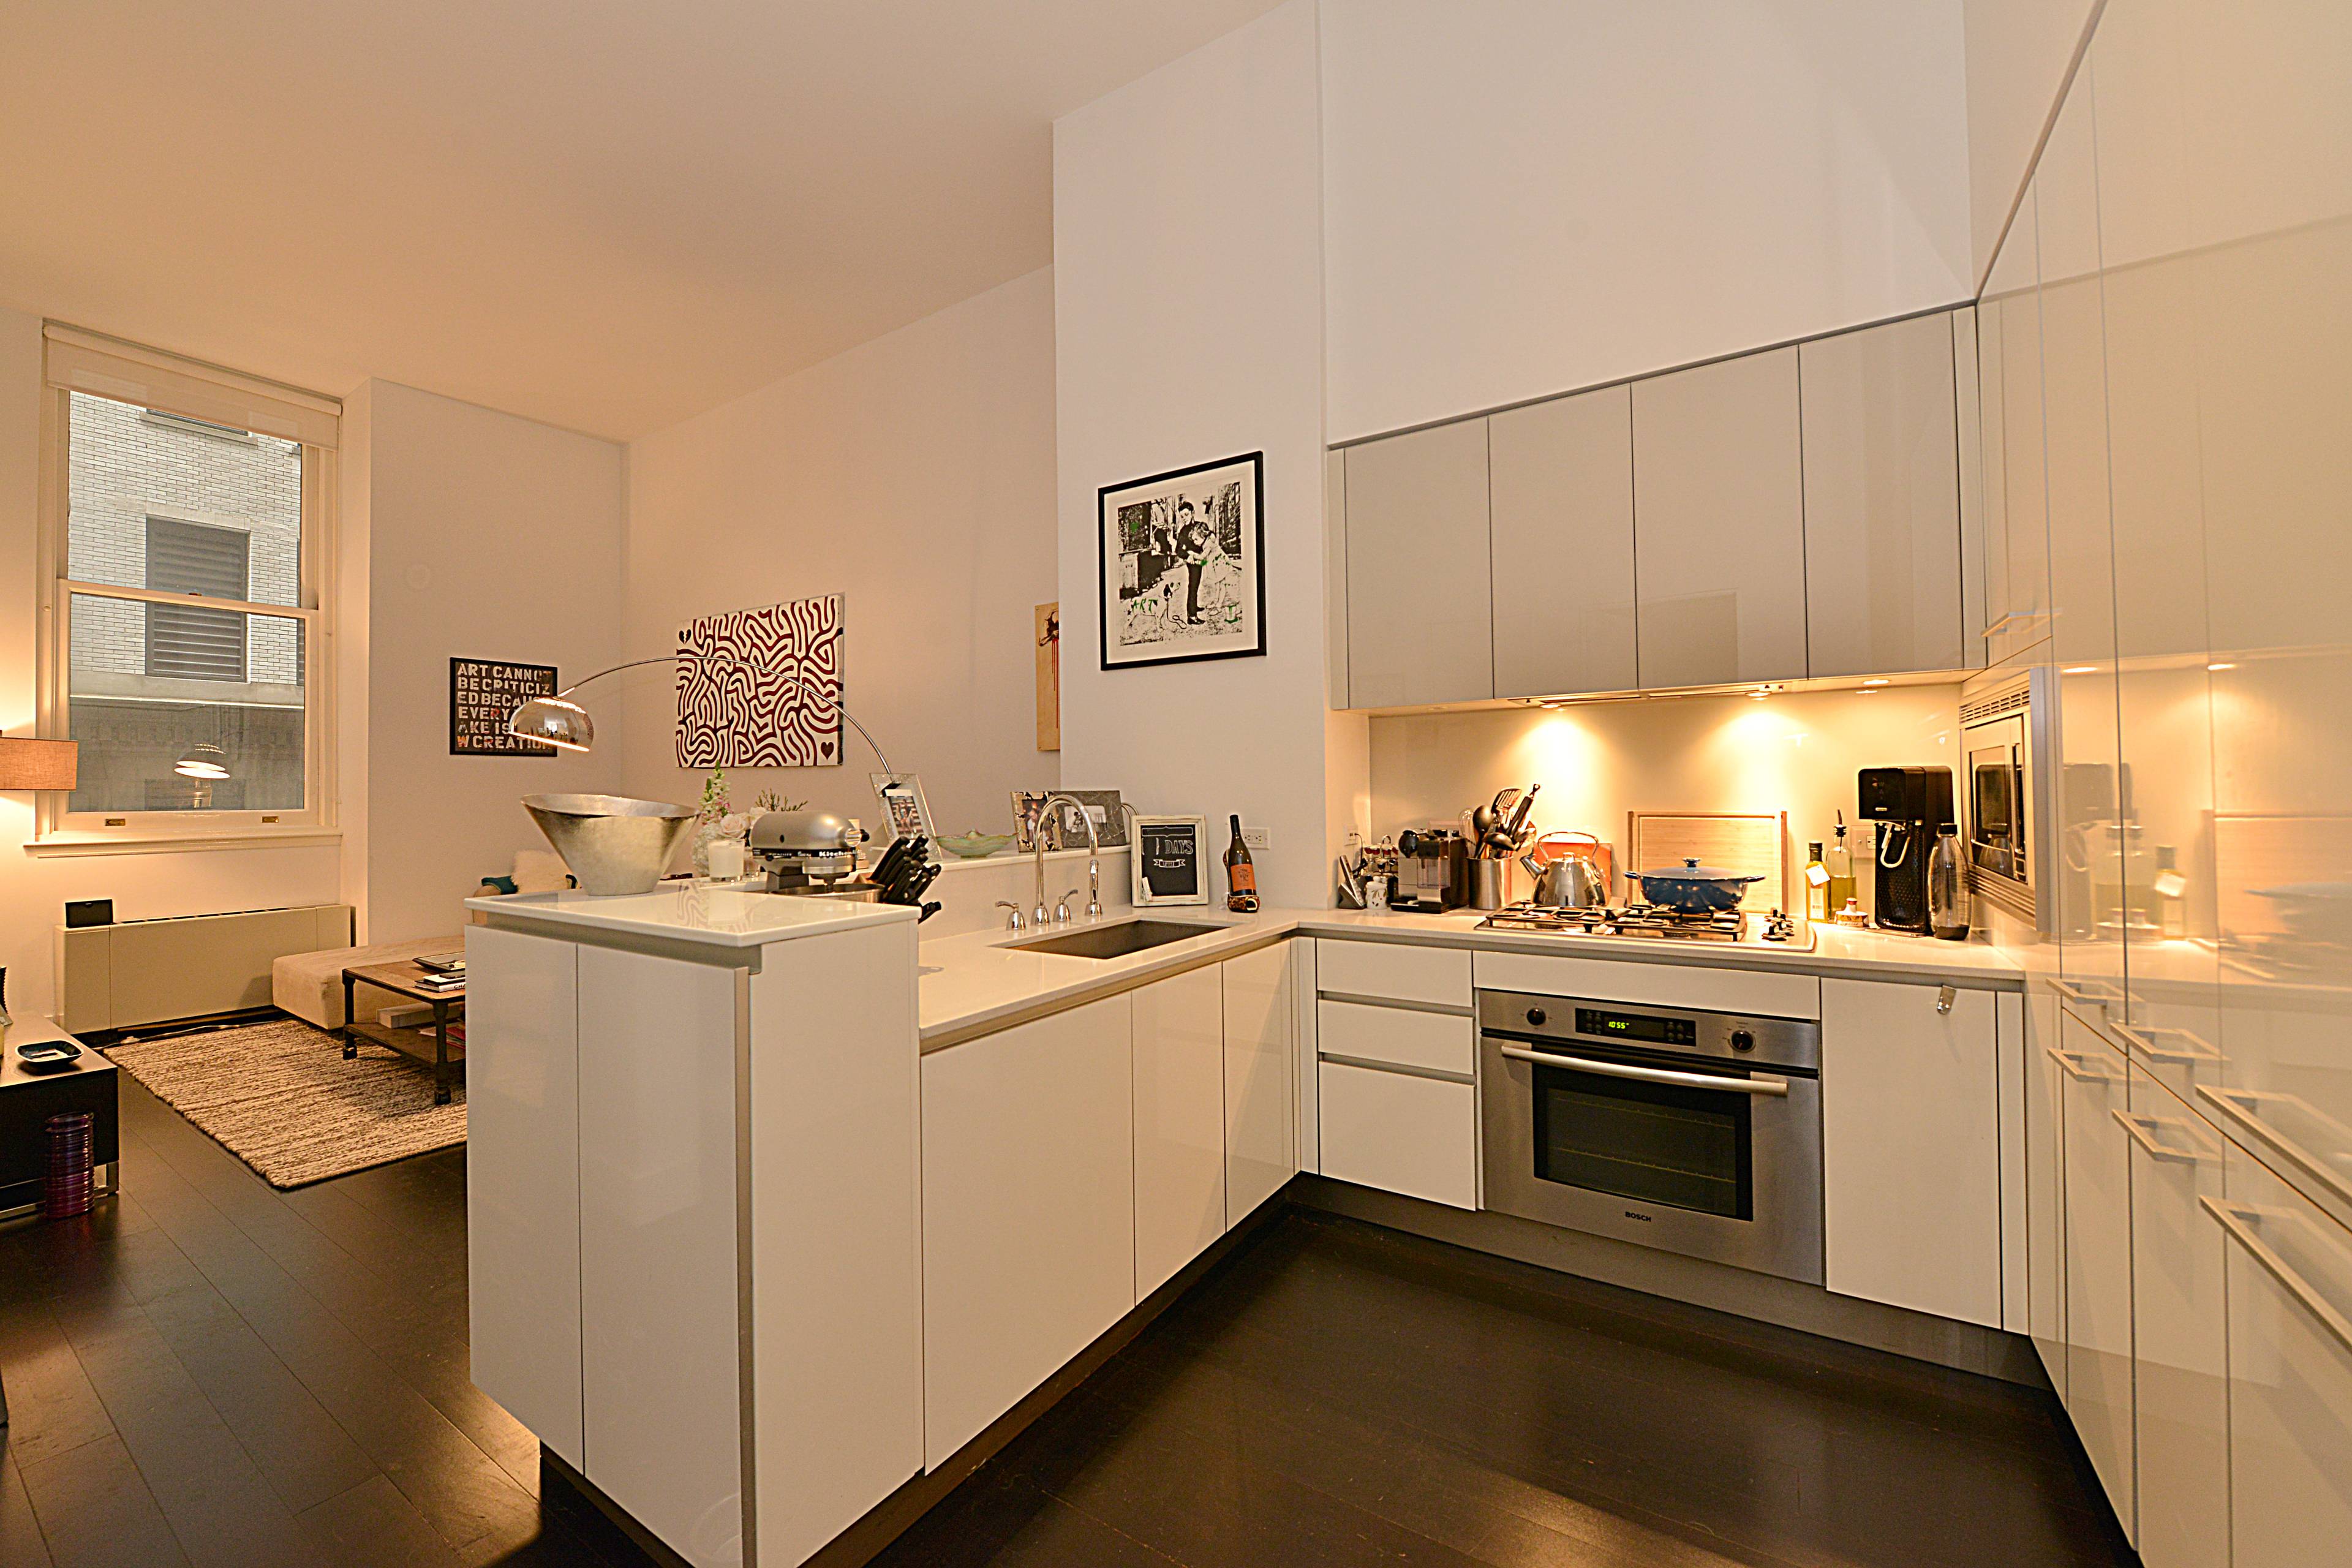 15 Foot Ceilings at this Impressive One Bedroom at 25 Broad St.